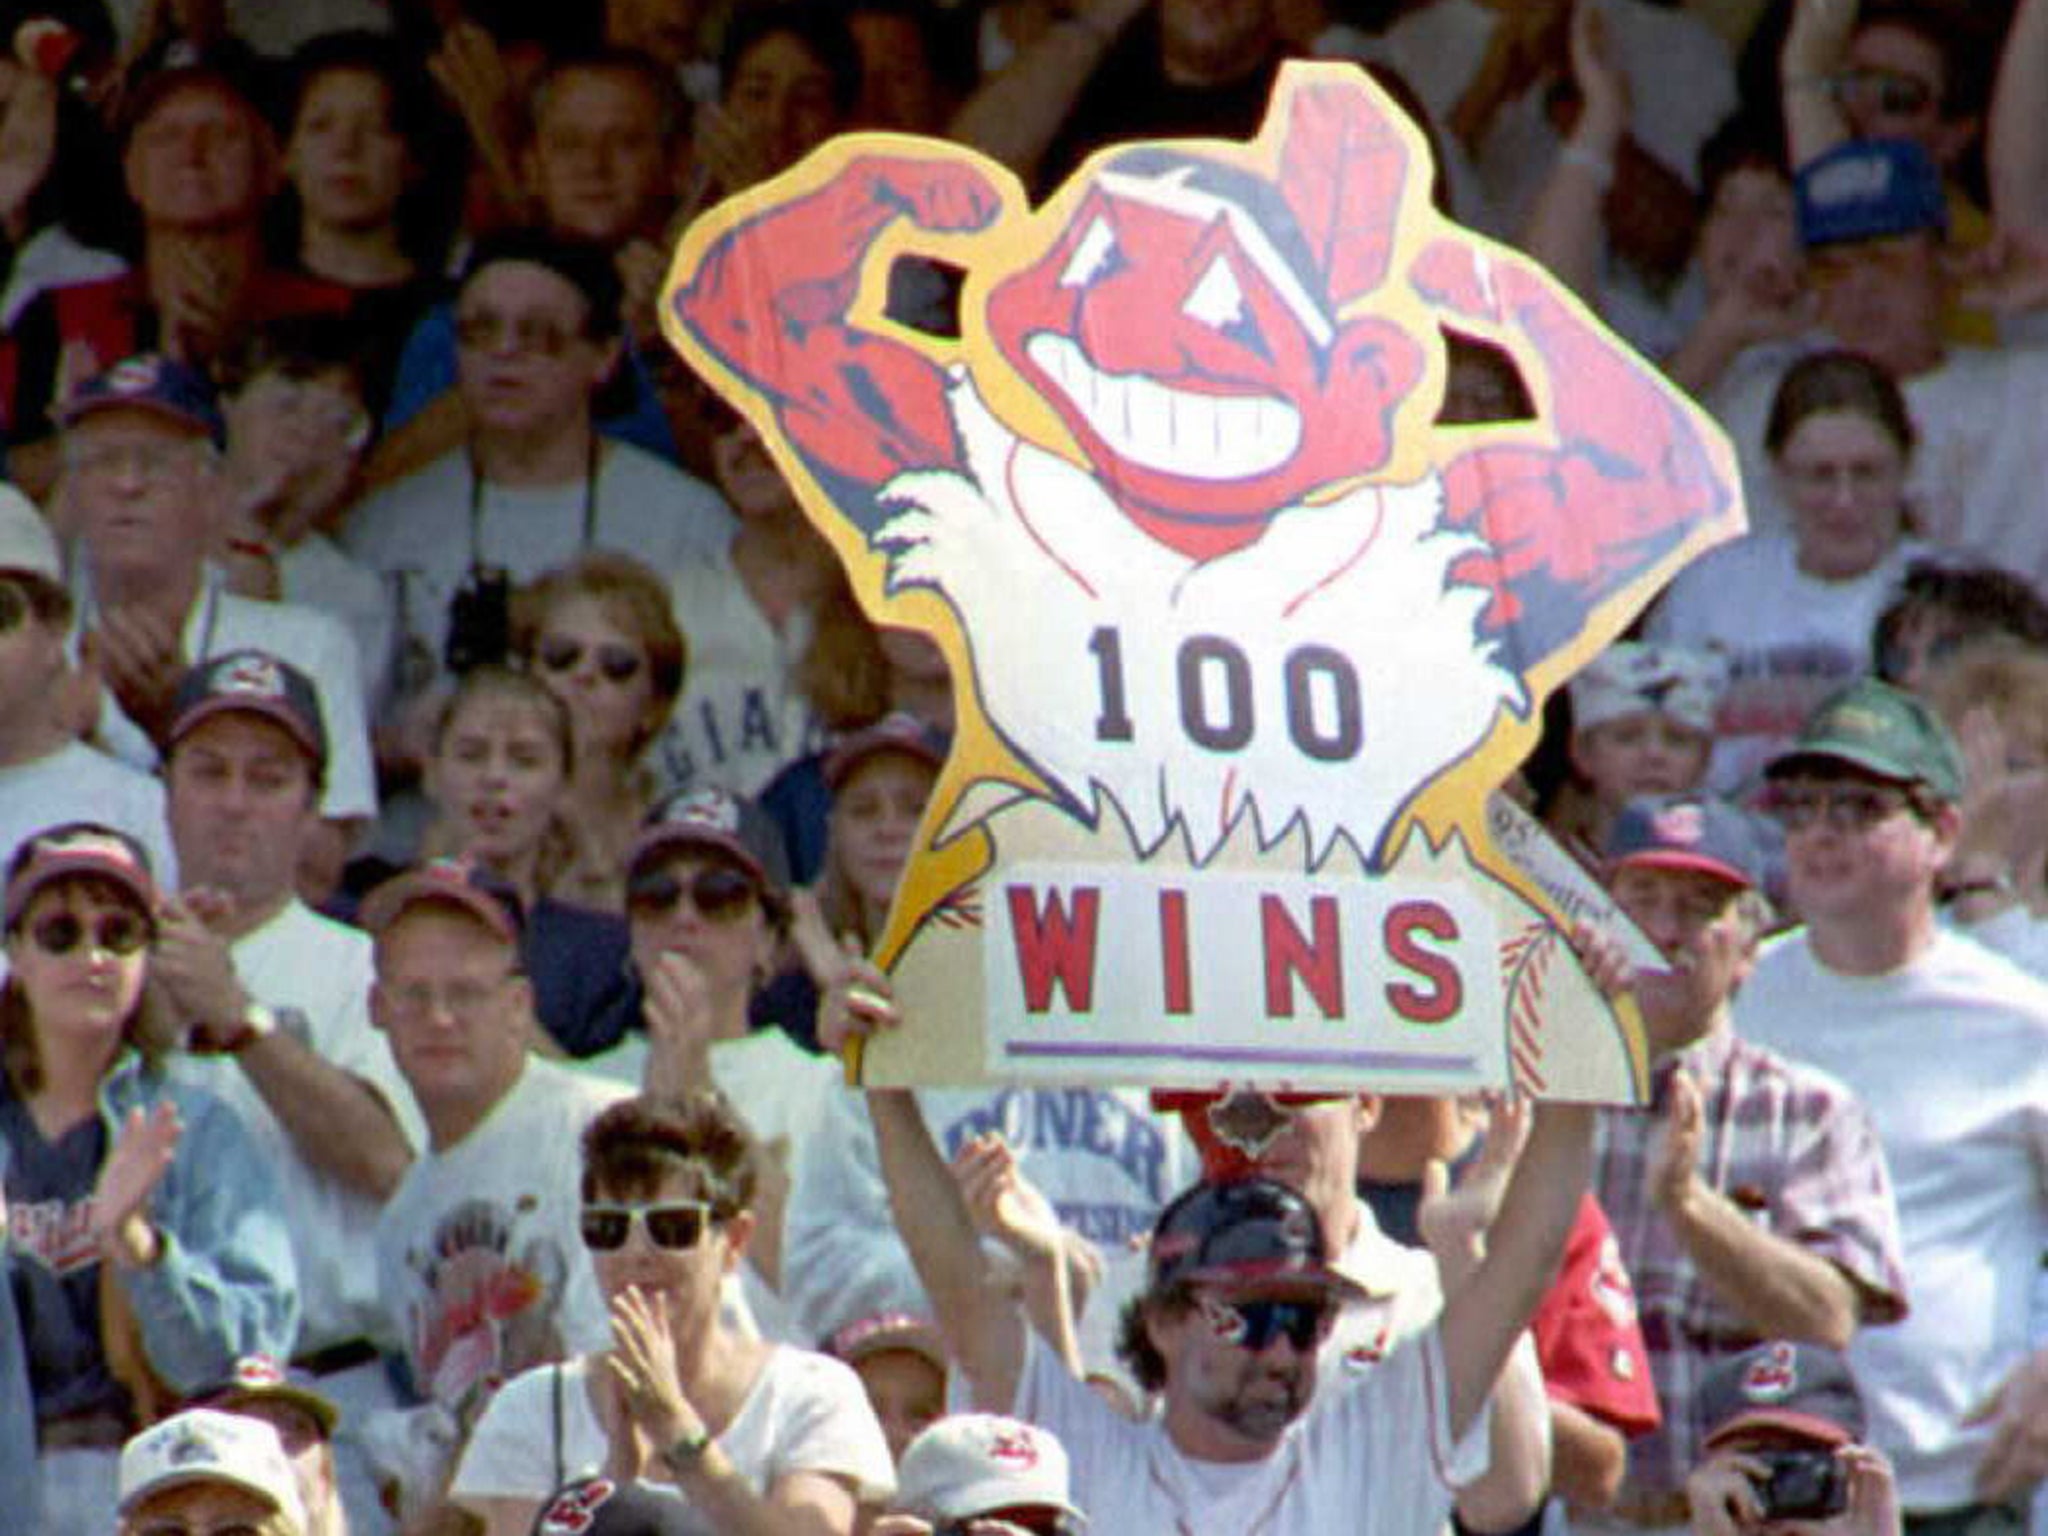 Cleveland Indians Chief Wahoo Trademark “Striking Out” in 2019